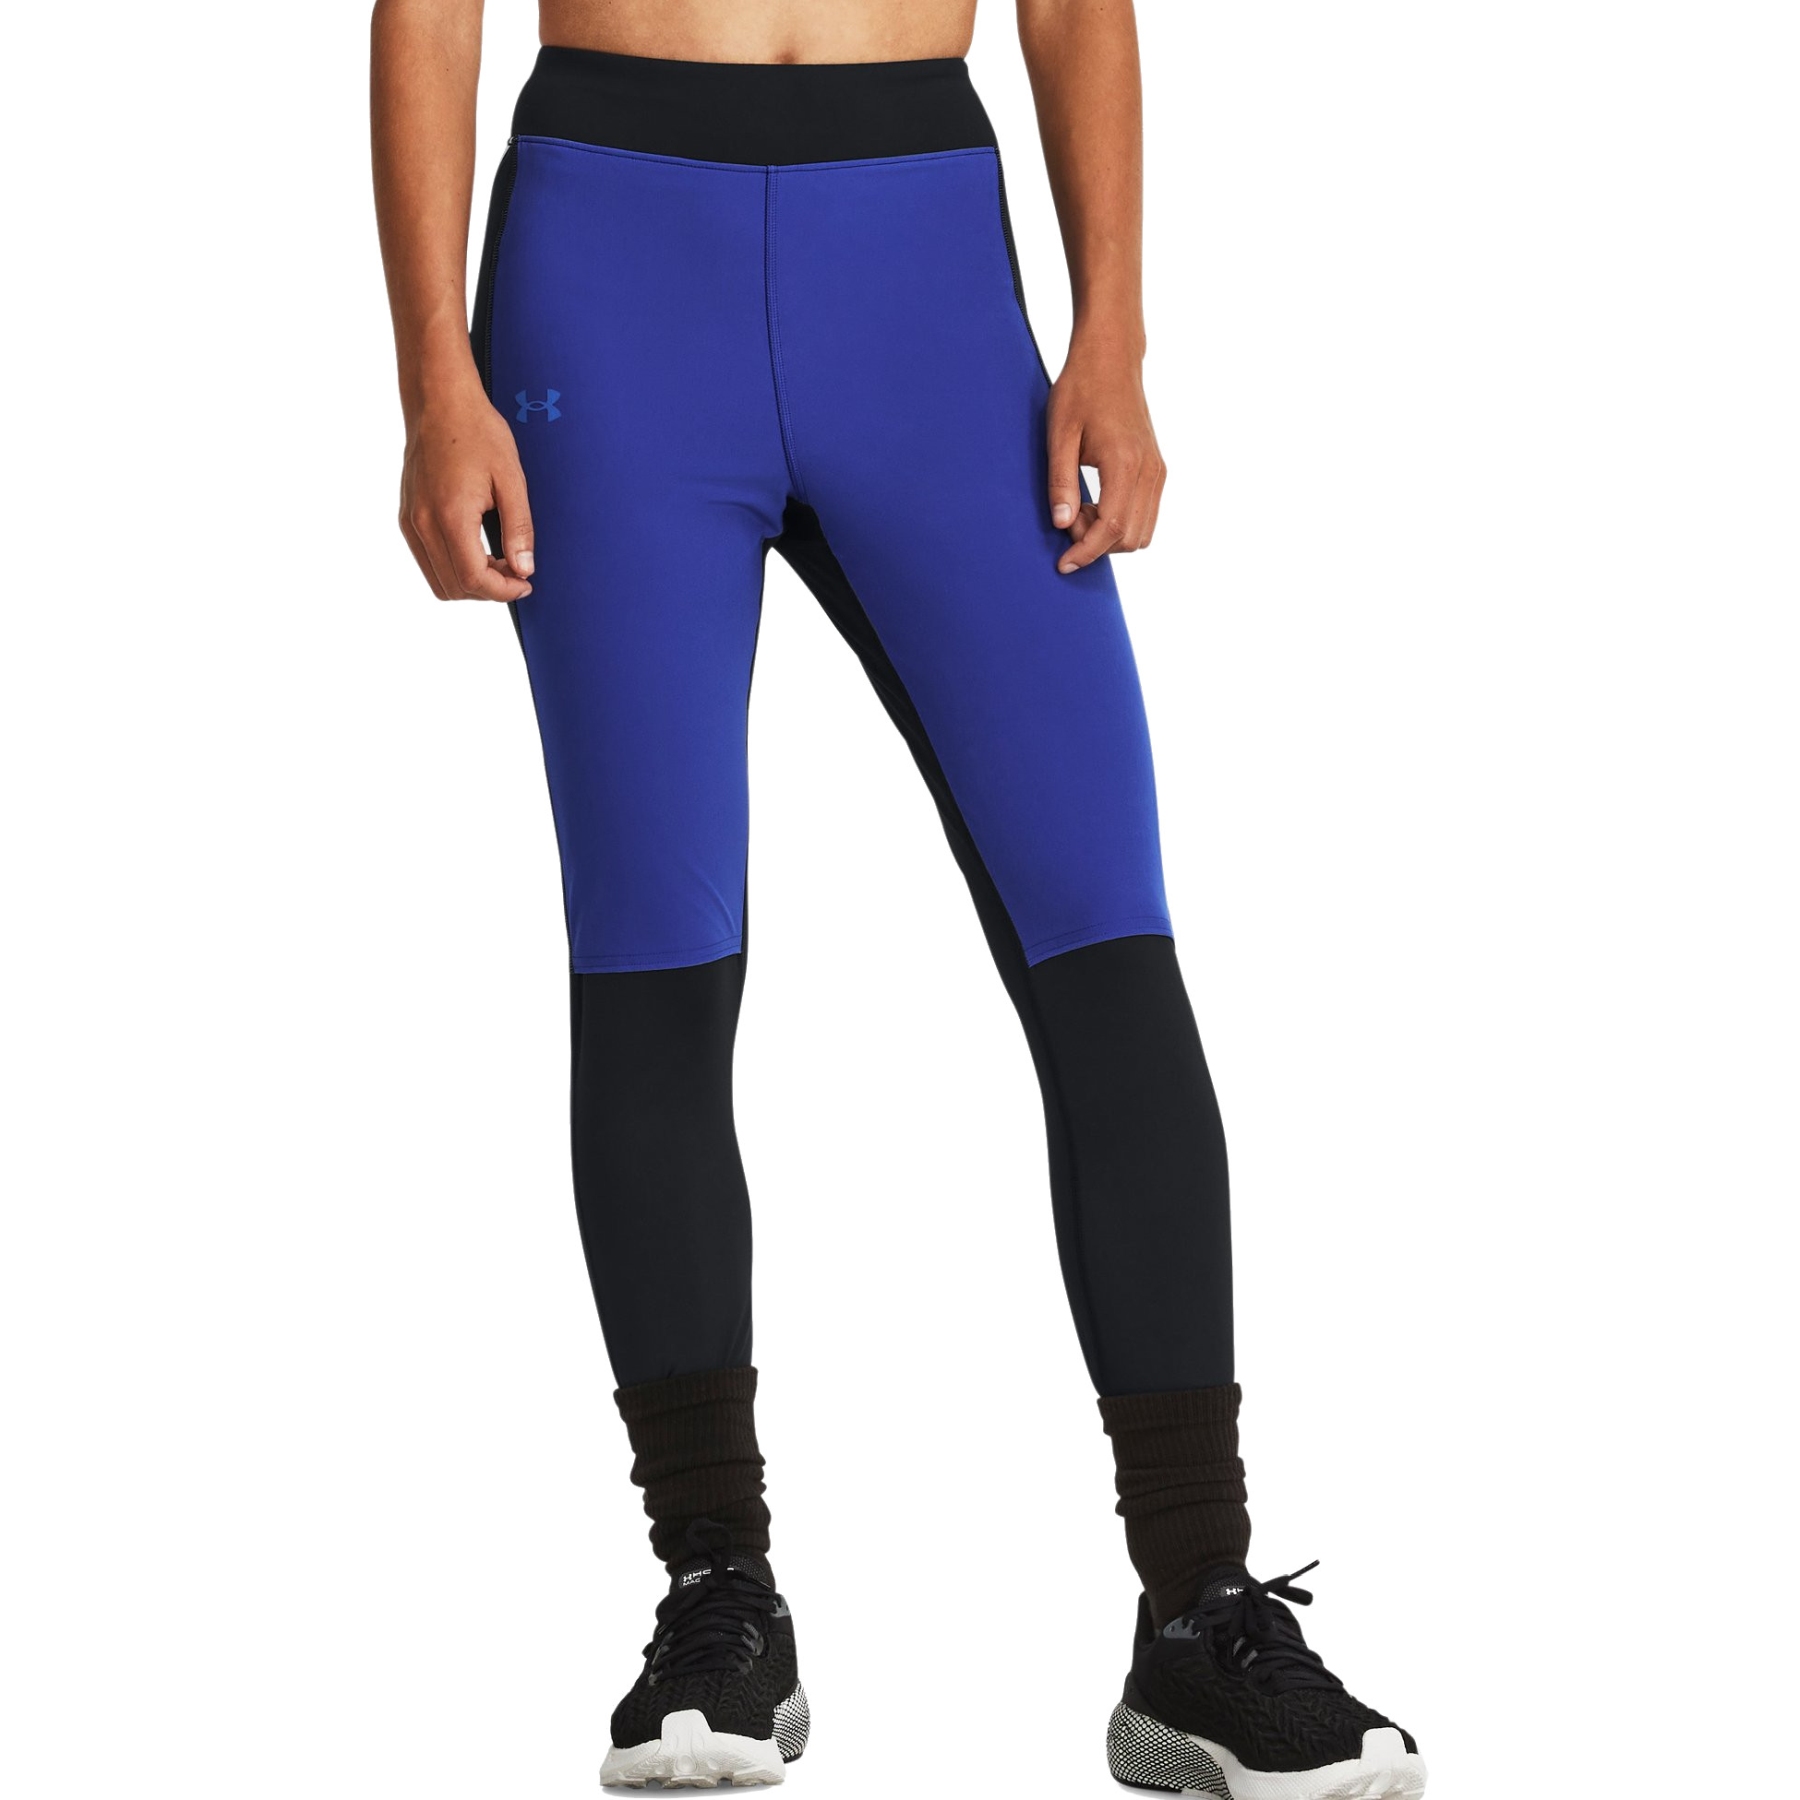 Under Armour UA Qualifier Cold Tights Women - Black/Team Royal